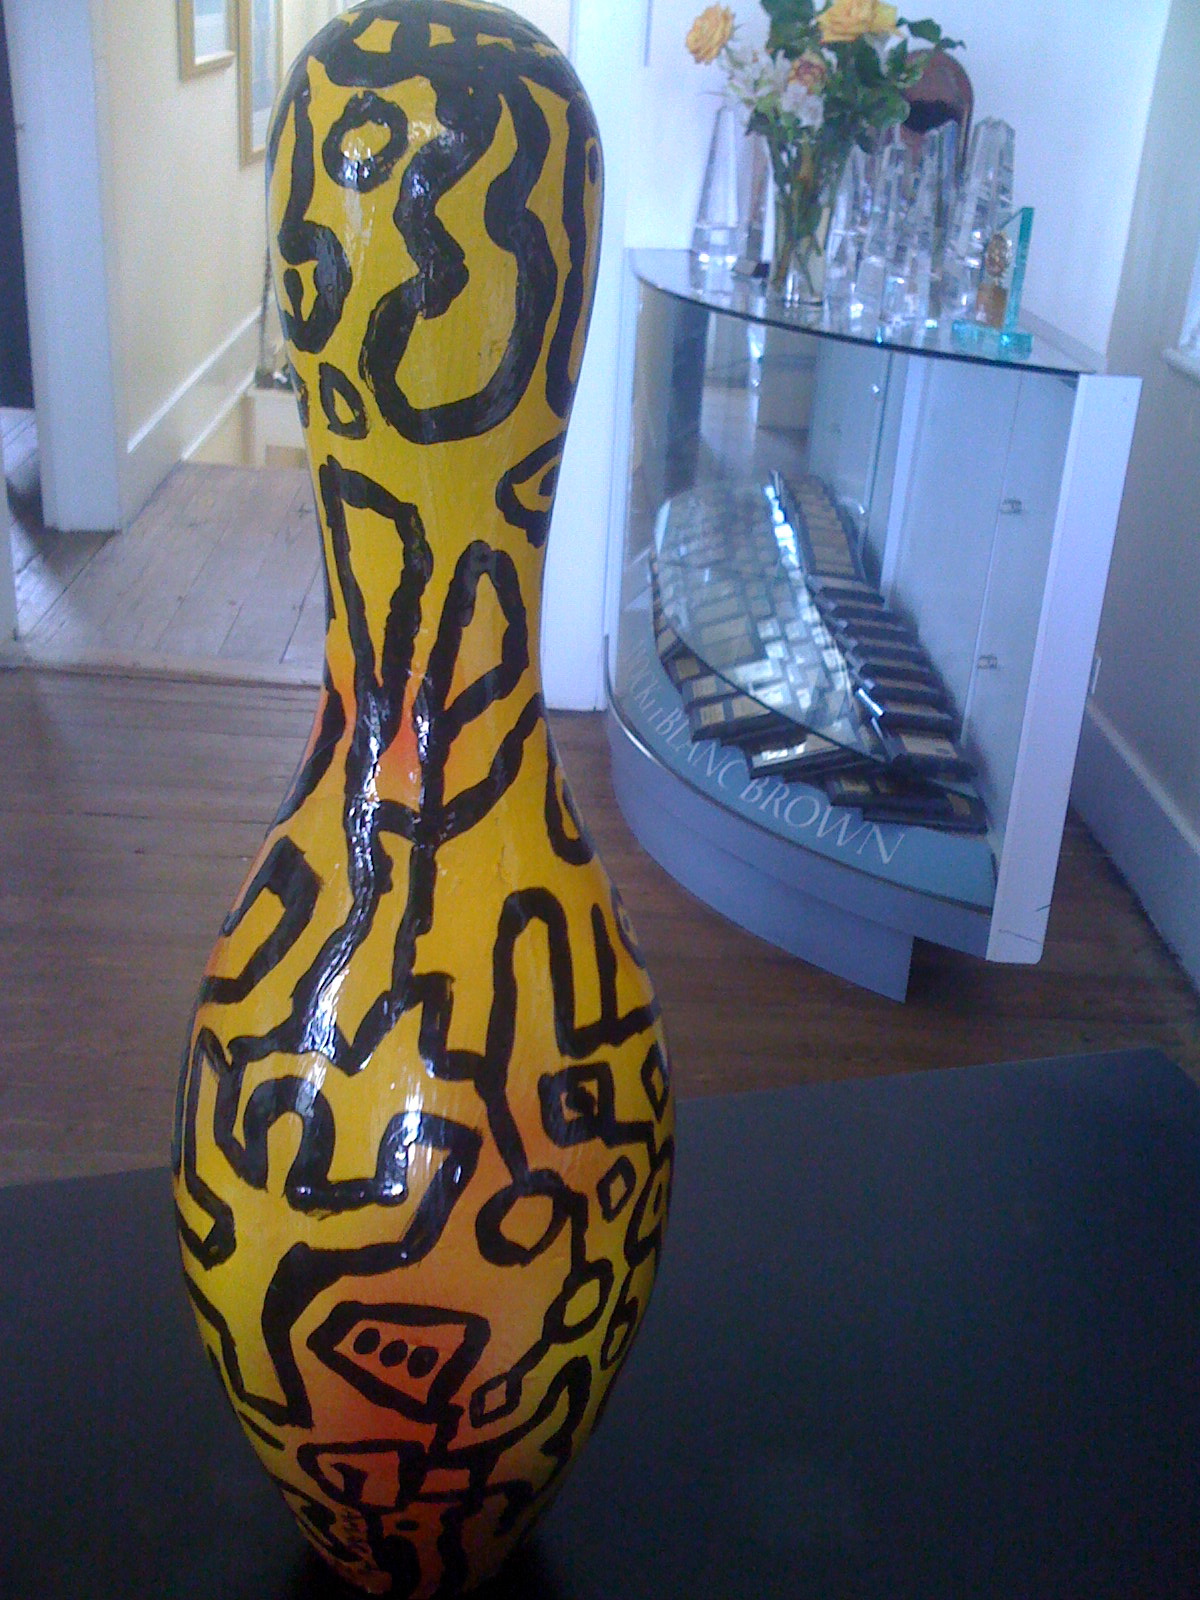 One of 10 bowling pins painted by 10 local artists